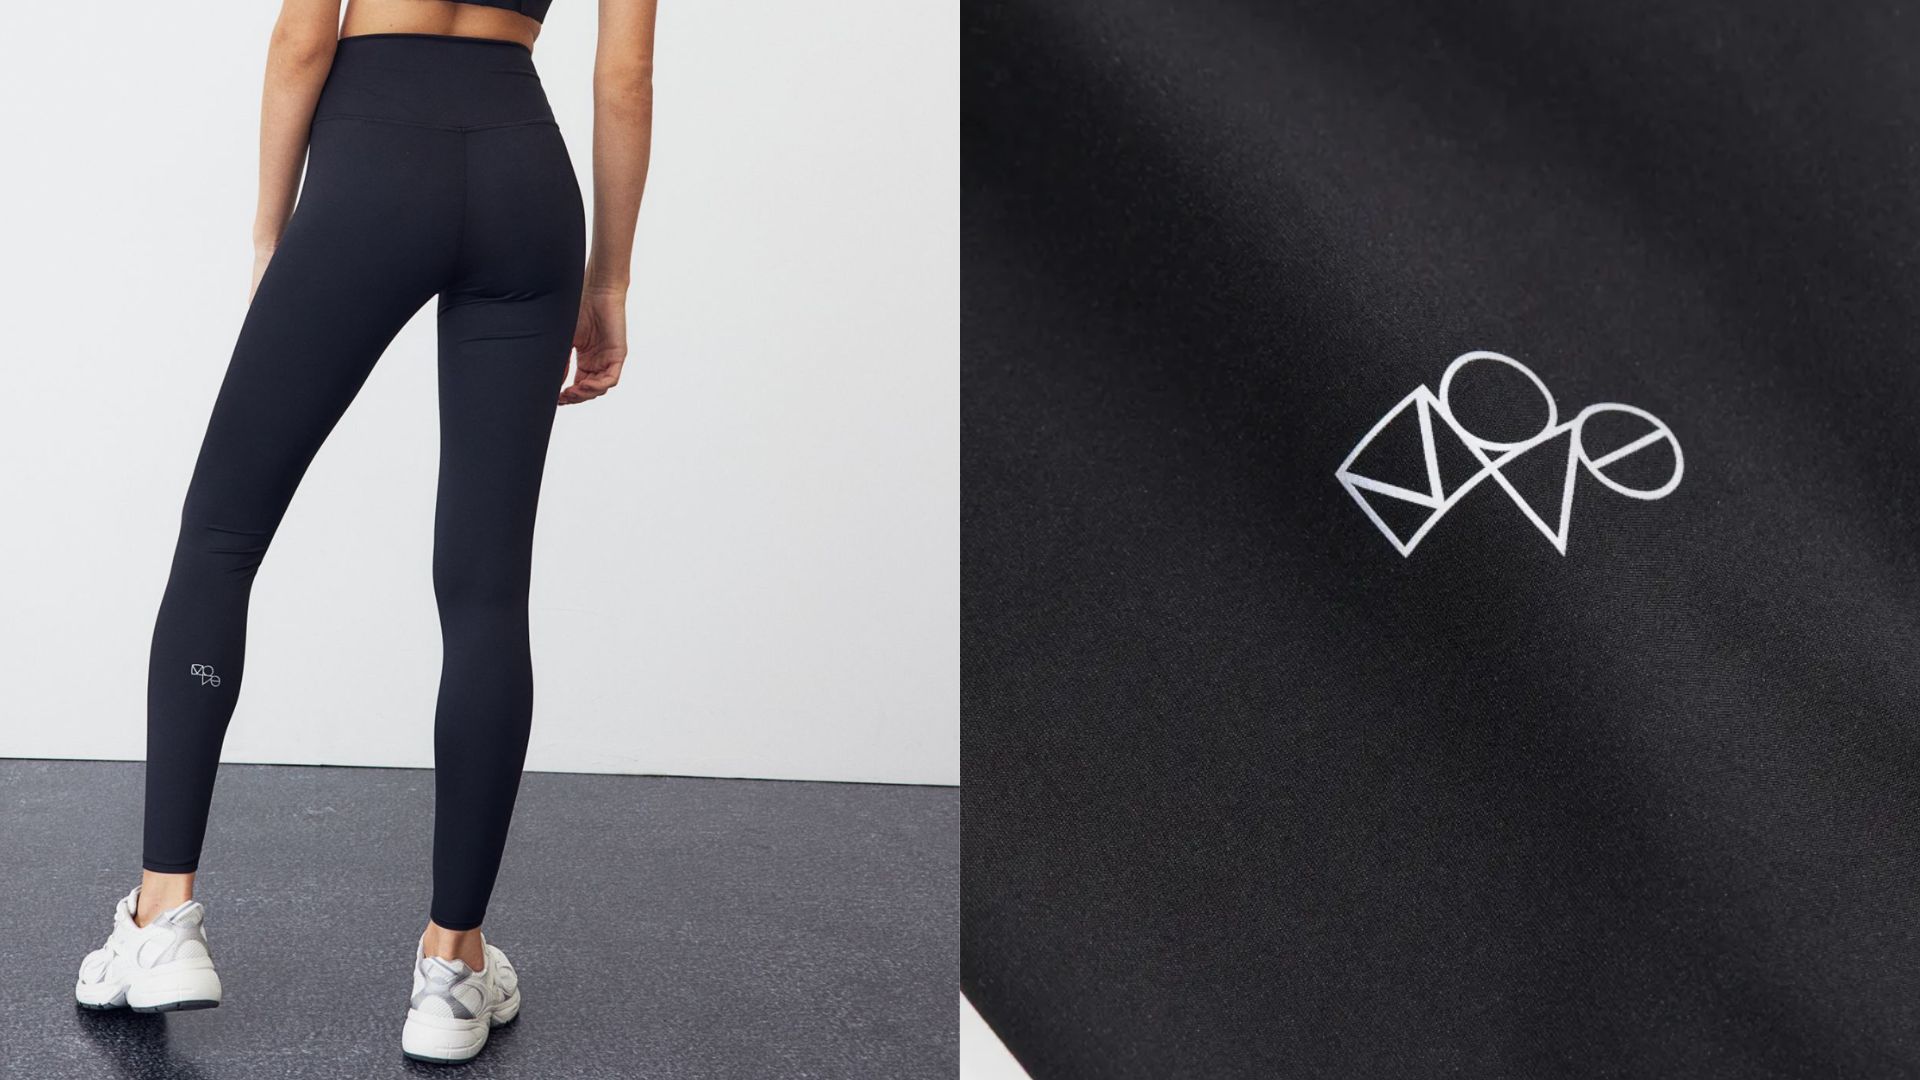 H&M sports leggings, view of the lower part of the leg with Move logo